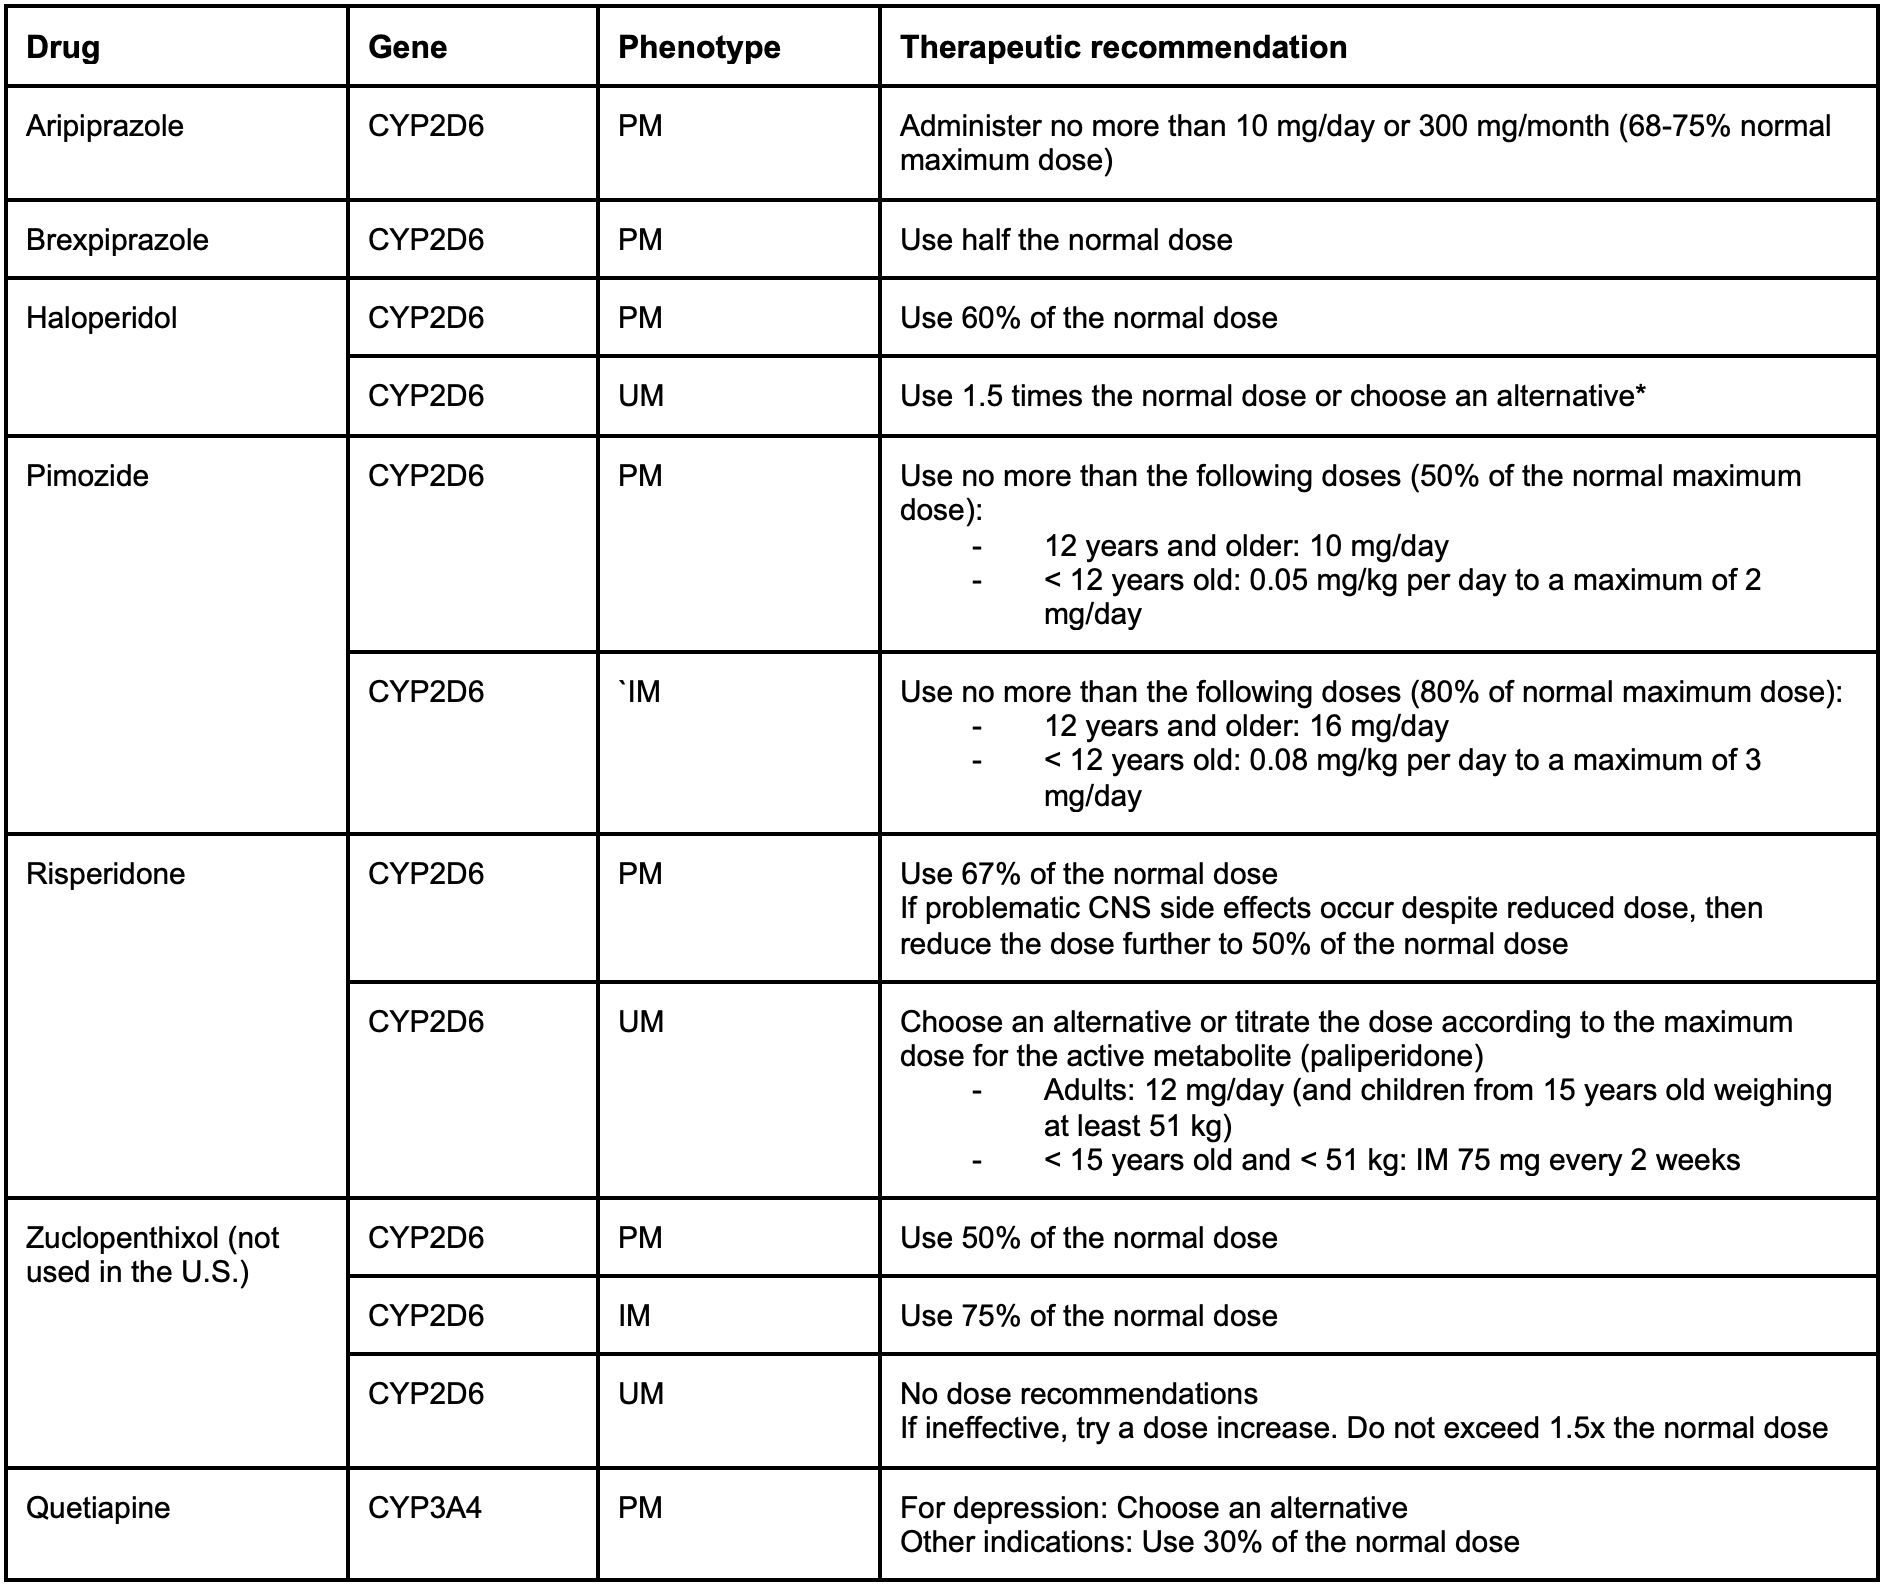 Table 2. Summary of the therapeutic recommendations based on CYP2D6 and CYP3A4 phenotype for antipsychotics 